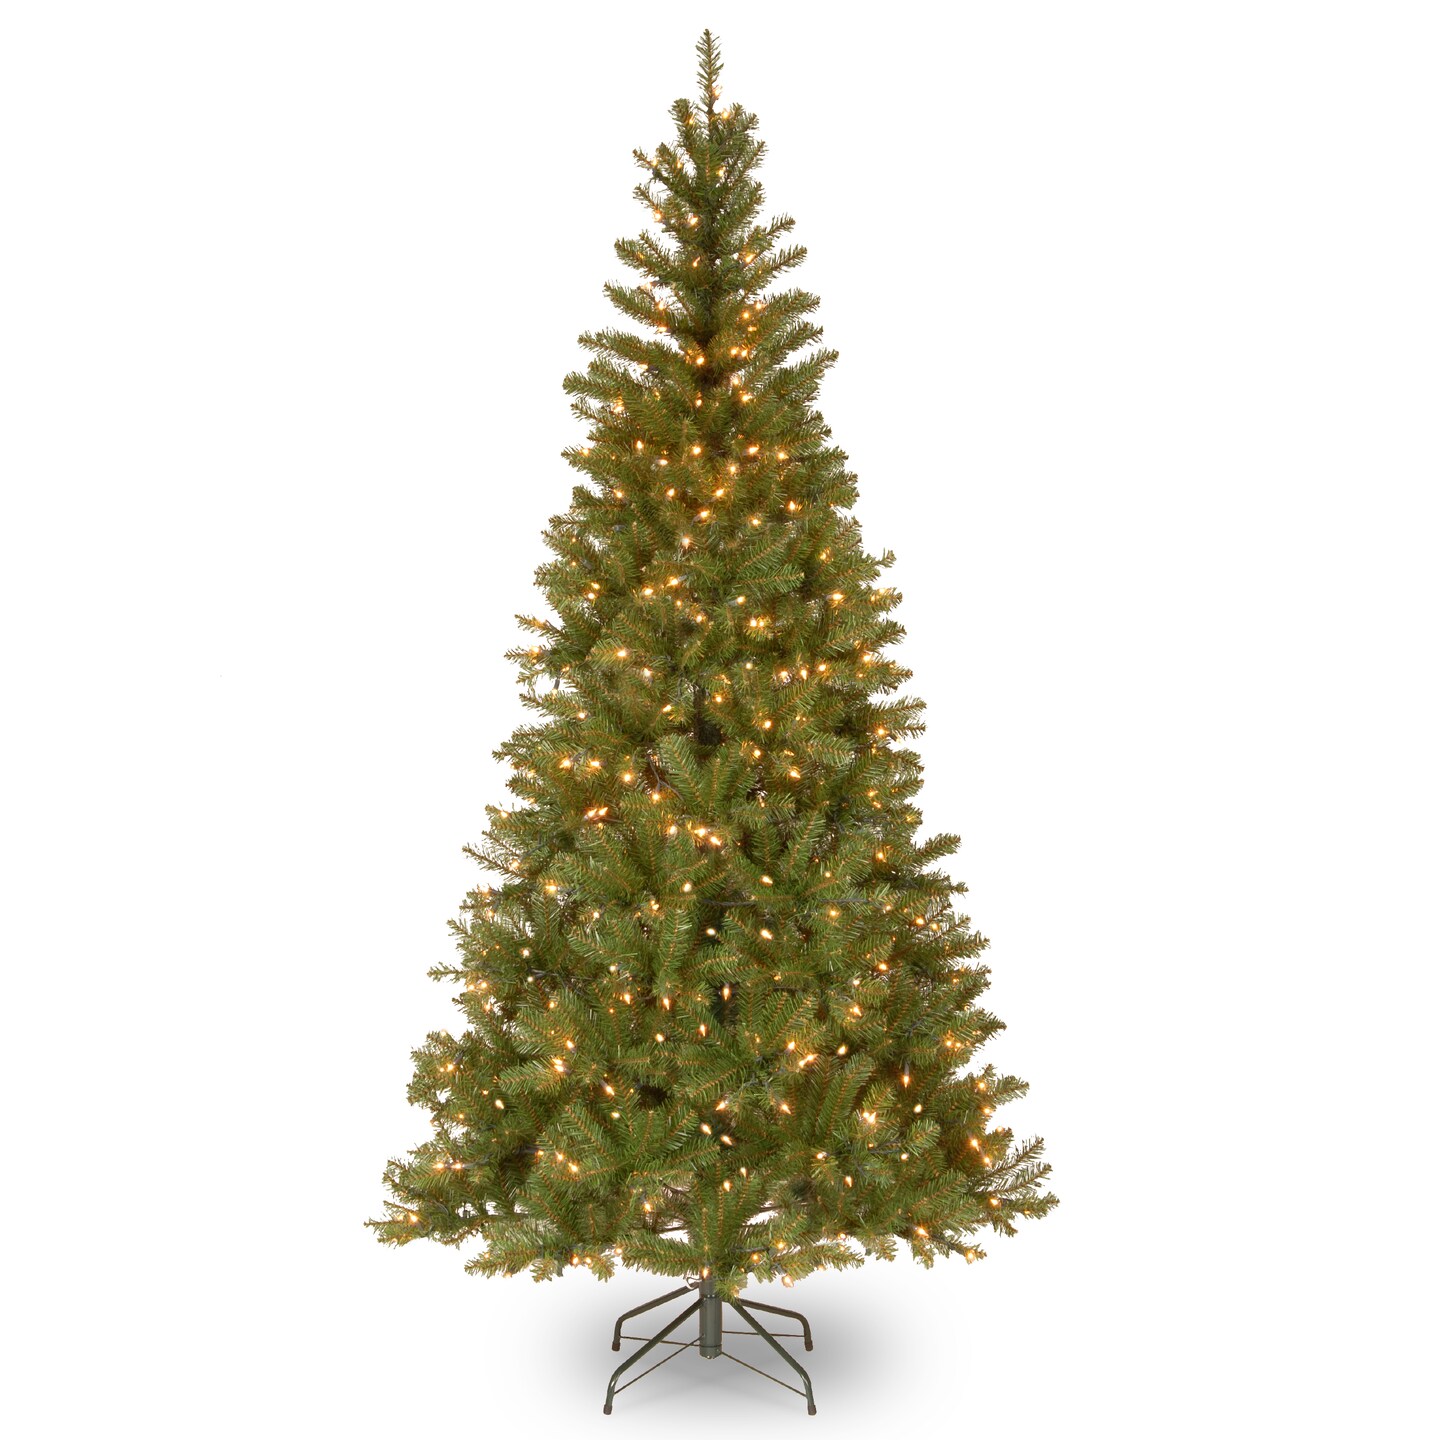 National Tree Company Pre-Lit Artificial Slim Christmas Tree, Green, Aspen Spruce, White Lights, Includes Stand, 6.5 Feet